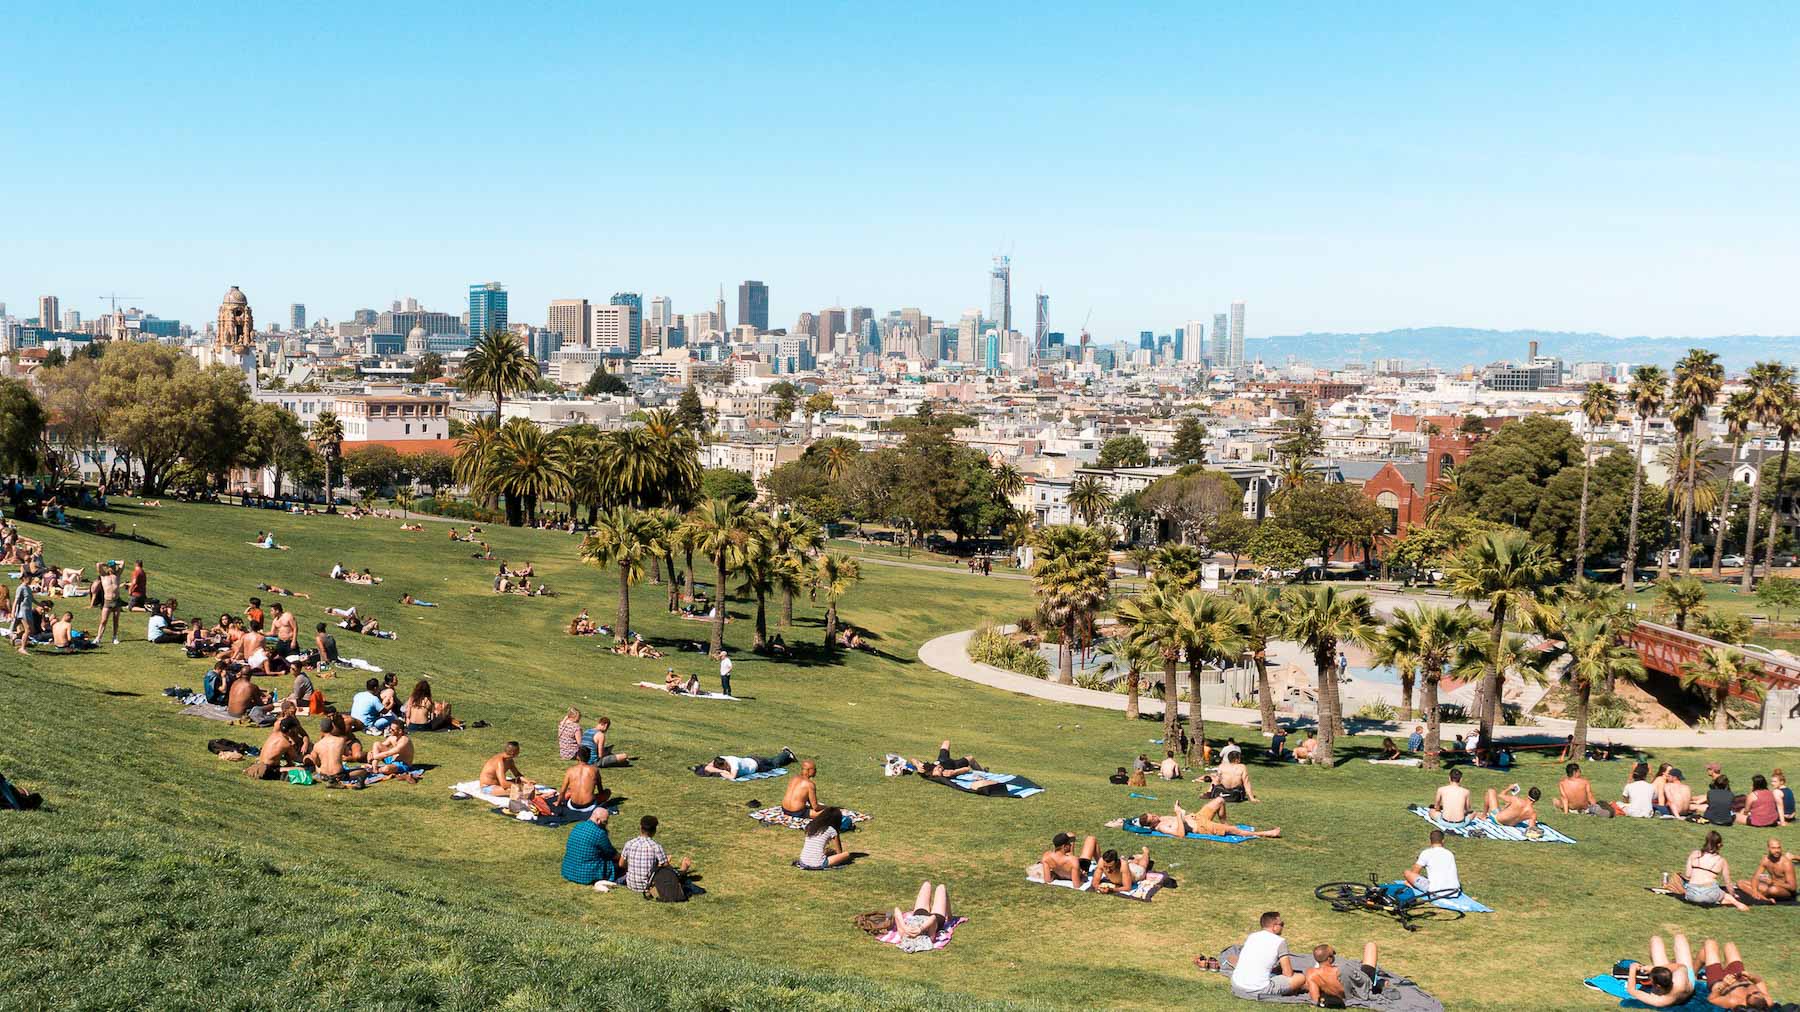 Locals basking in Mission Dolores Park in San Francisco's Mission neighborhood on a sunny day